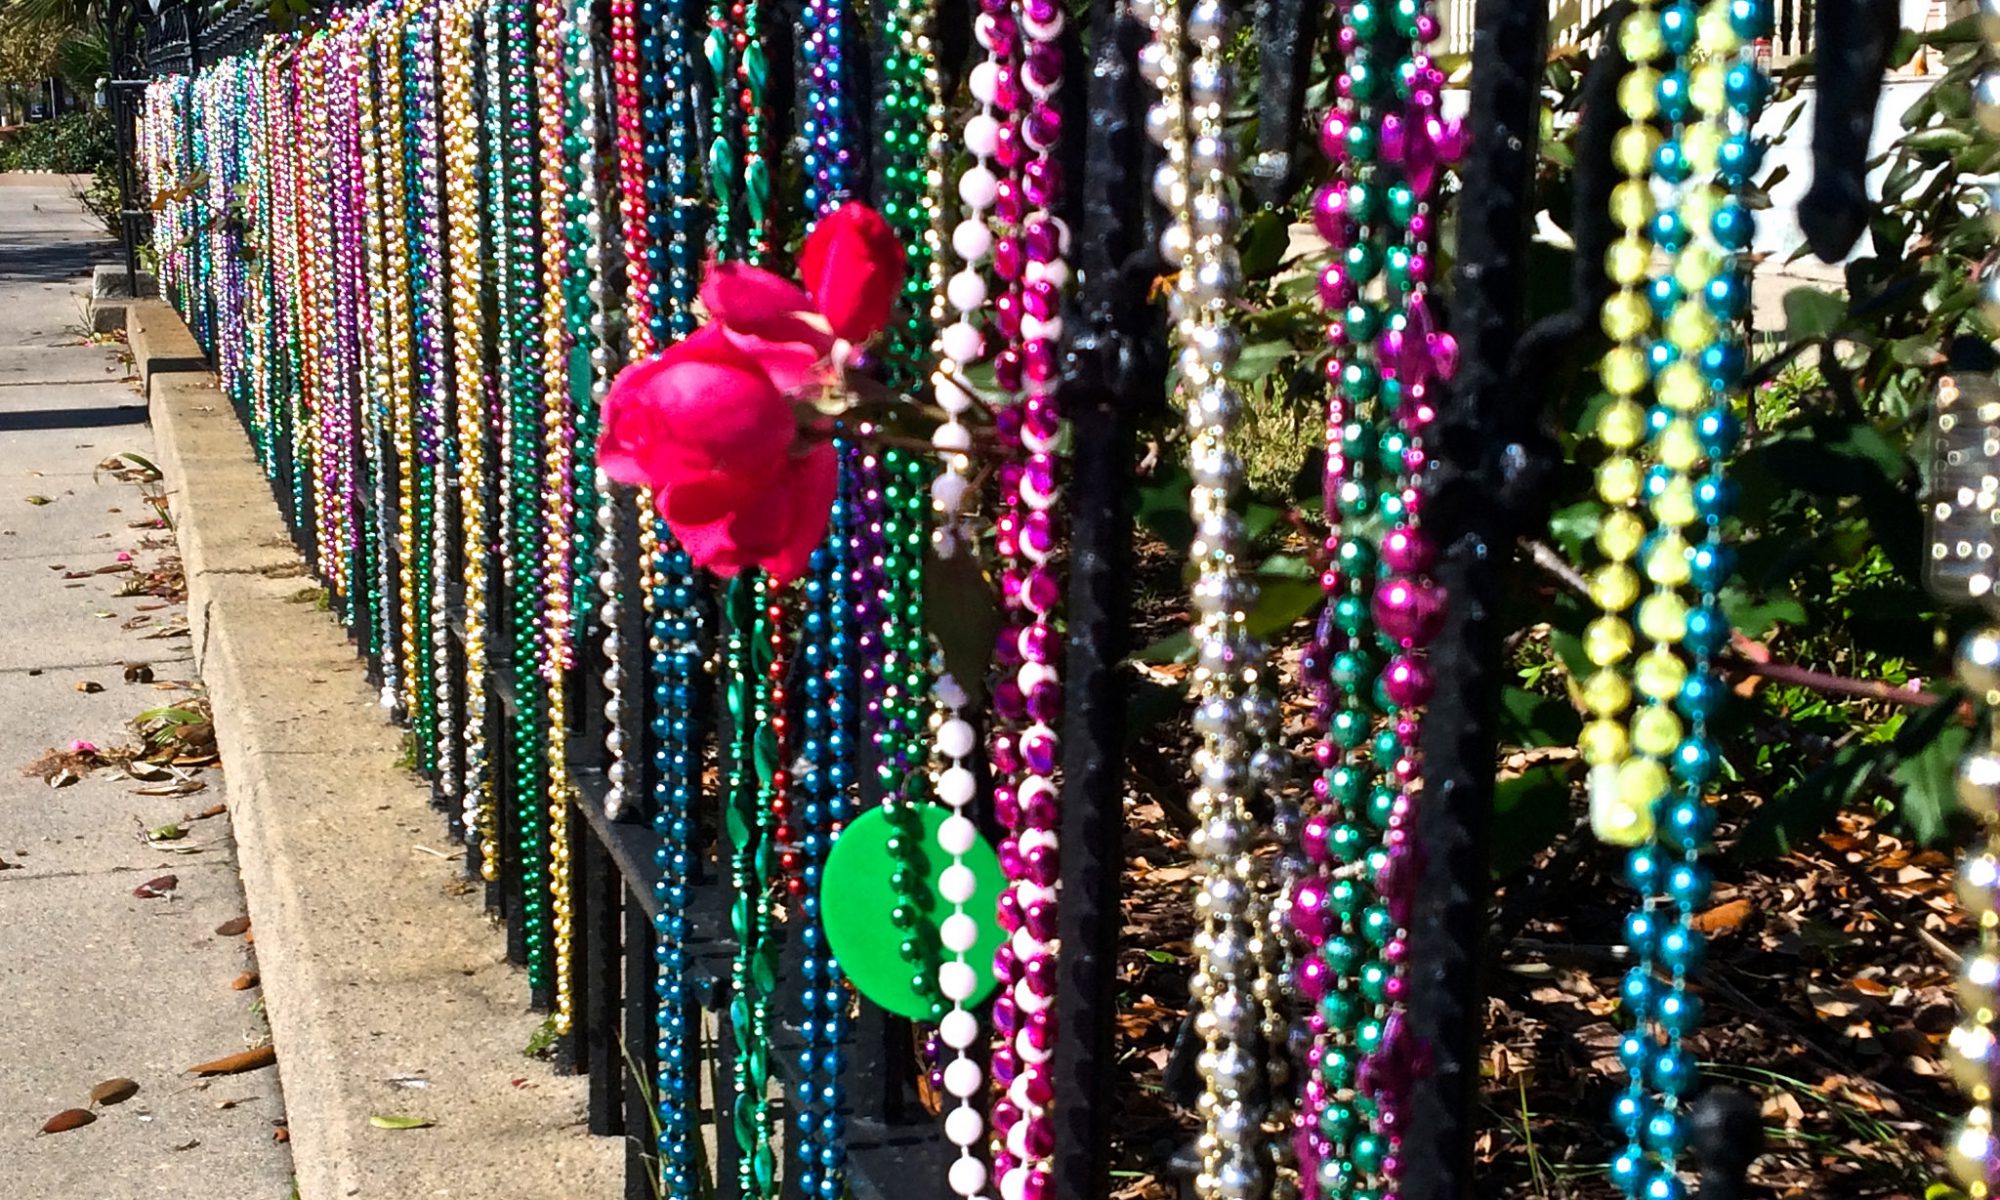 A fence covered in Mardi Gras beads of various colors